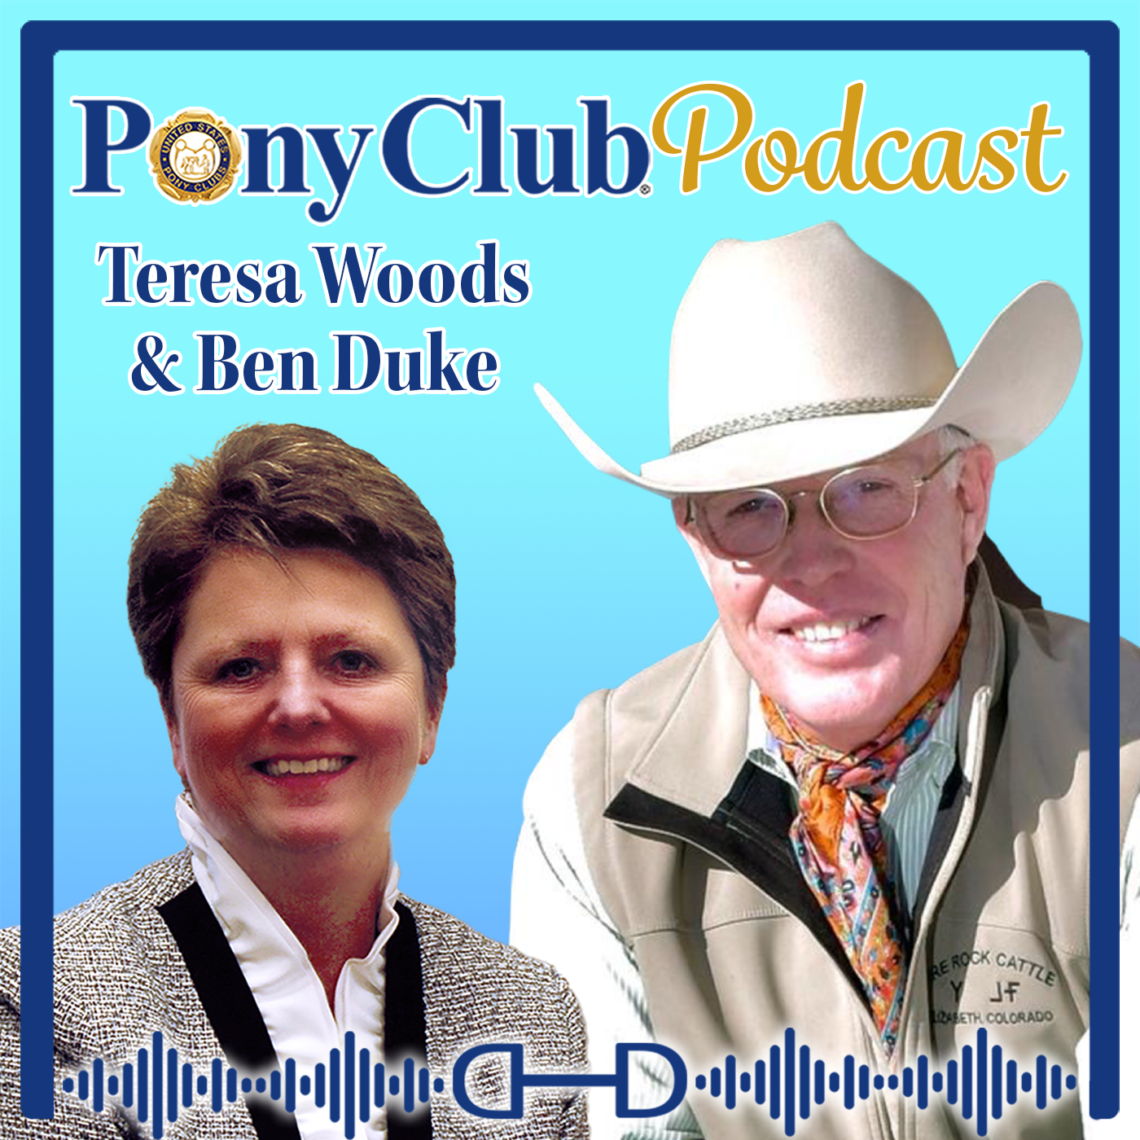 A promotional design for the Pony Club Podcast episode #1